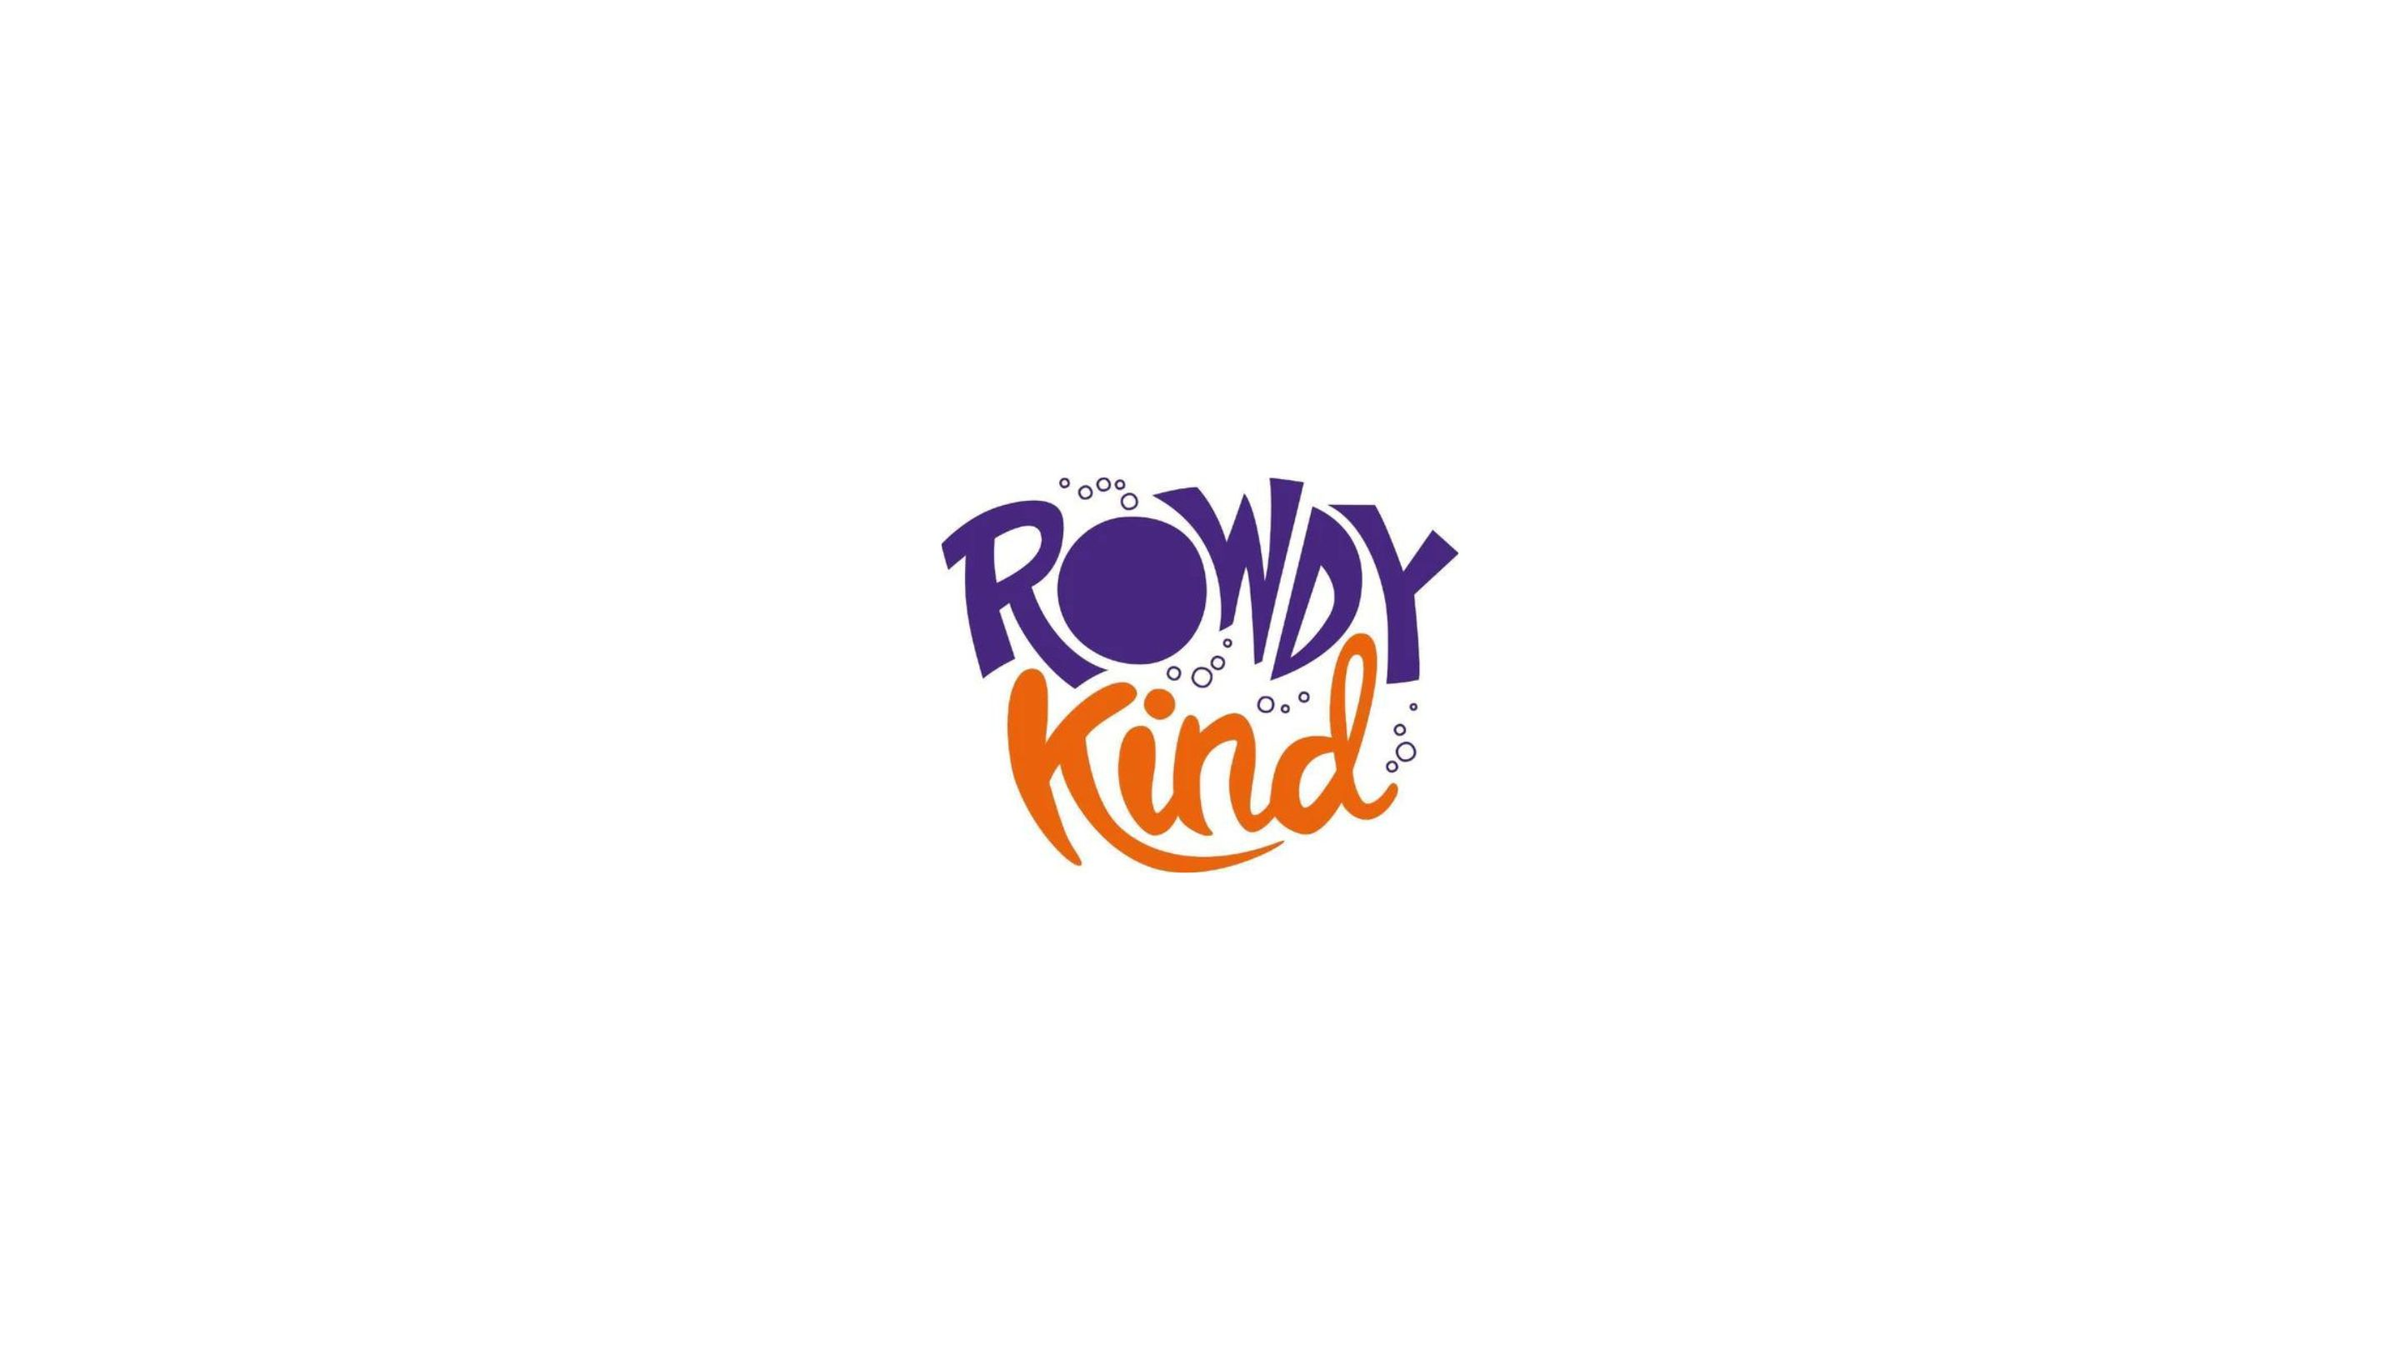 Rowdy Kind Logo. Rowdy is in a chunky purple fint and Kind in a more looping orange forn. The words are in a rough cicrcle formation with little bubbles dotted around and the text looks like it's being washed down a plug hole. 